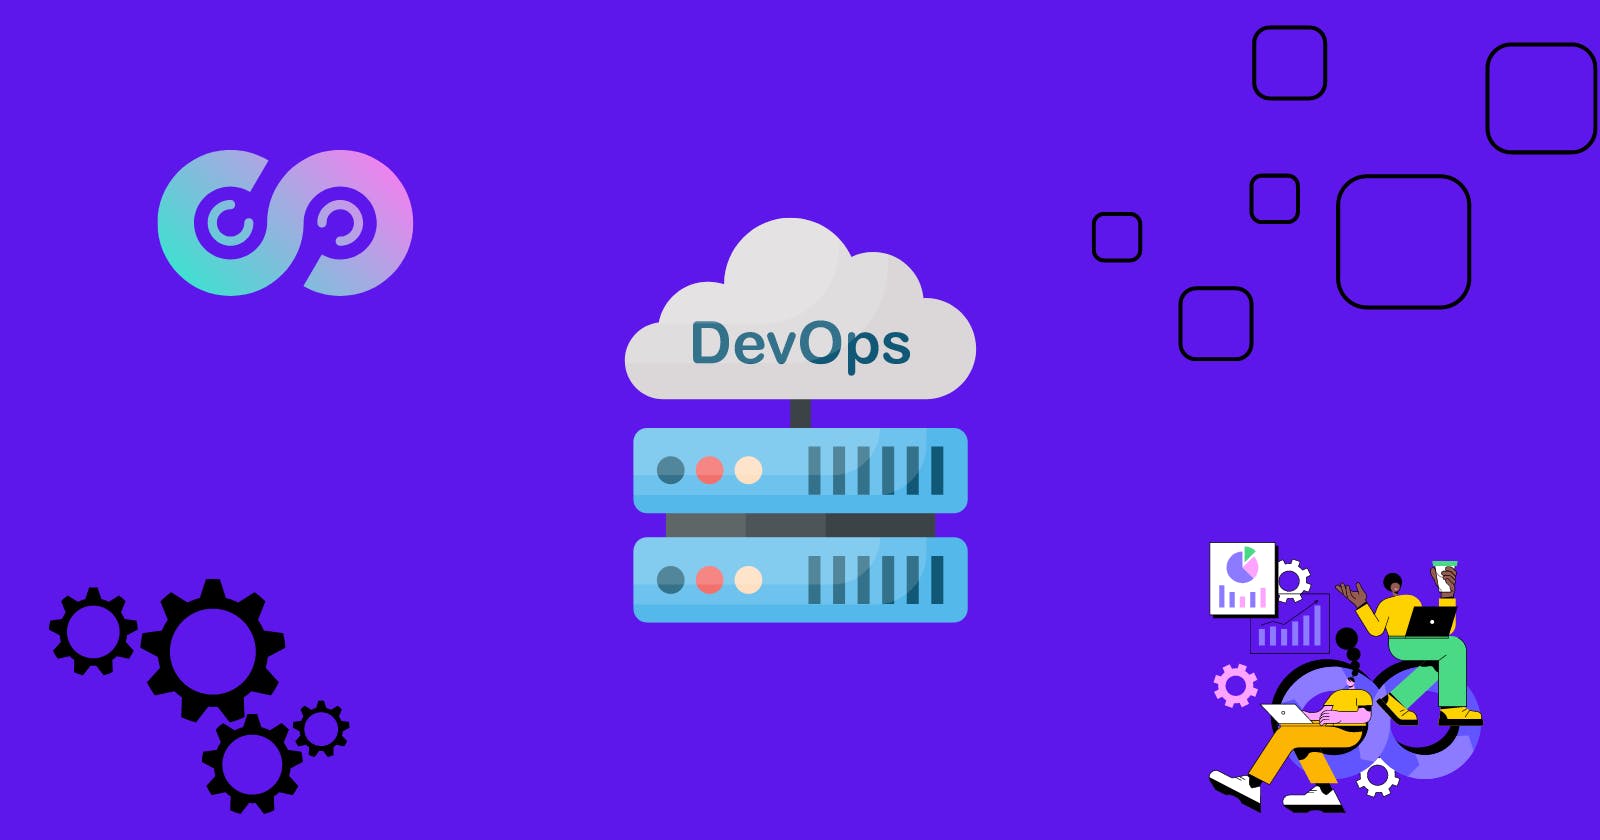 DevOps: The Lifecycle of an Application